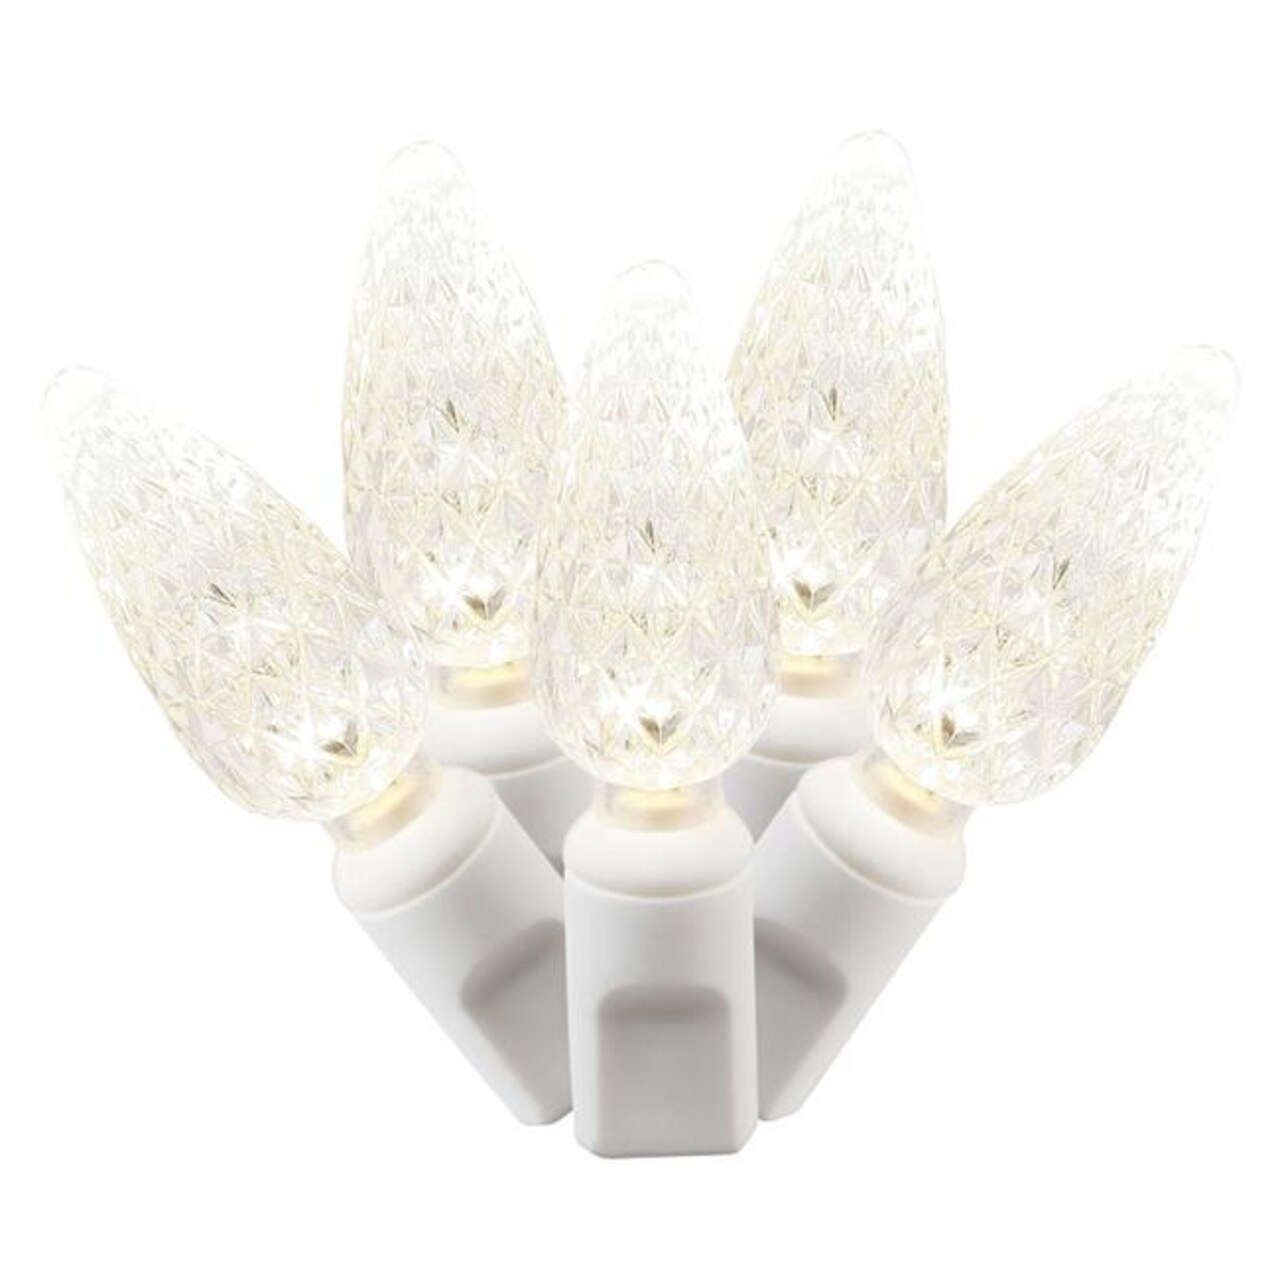 LED C6 White Wire End Connecting 4 in. Spacing 34 ft. Long Light Set with Warm White Lights